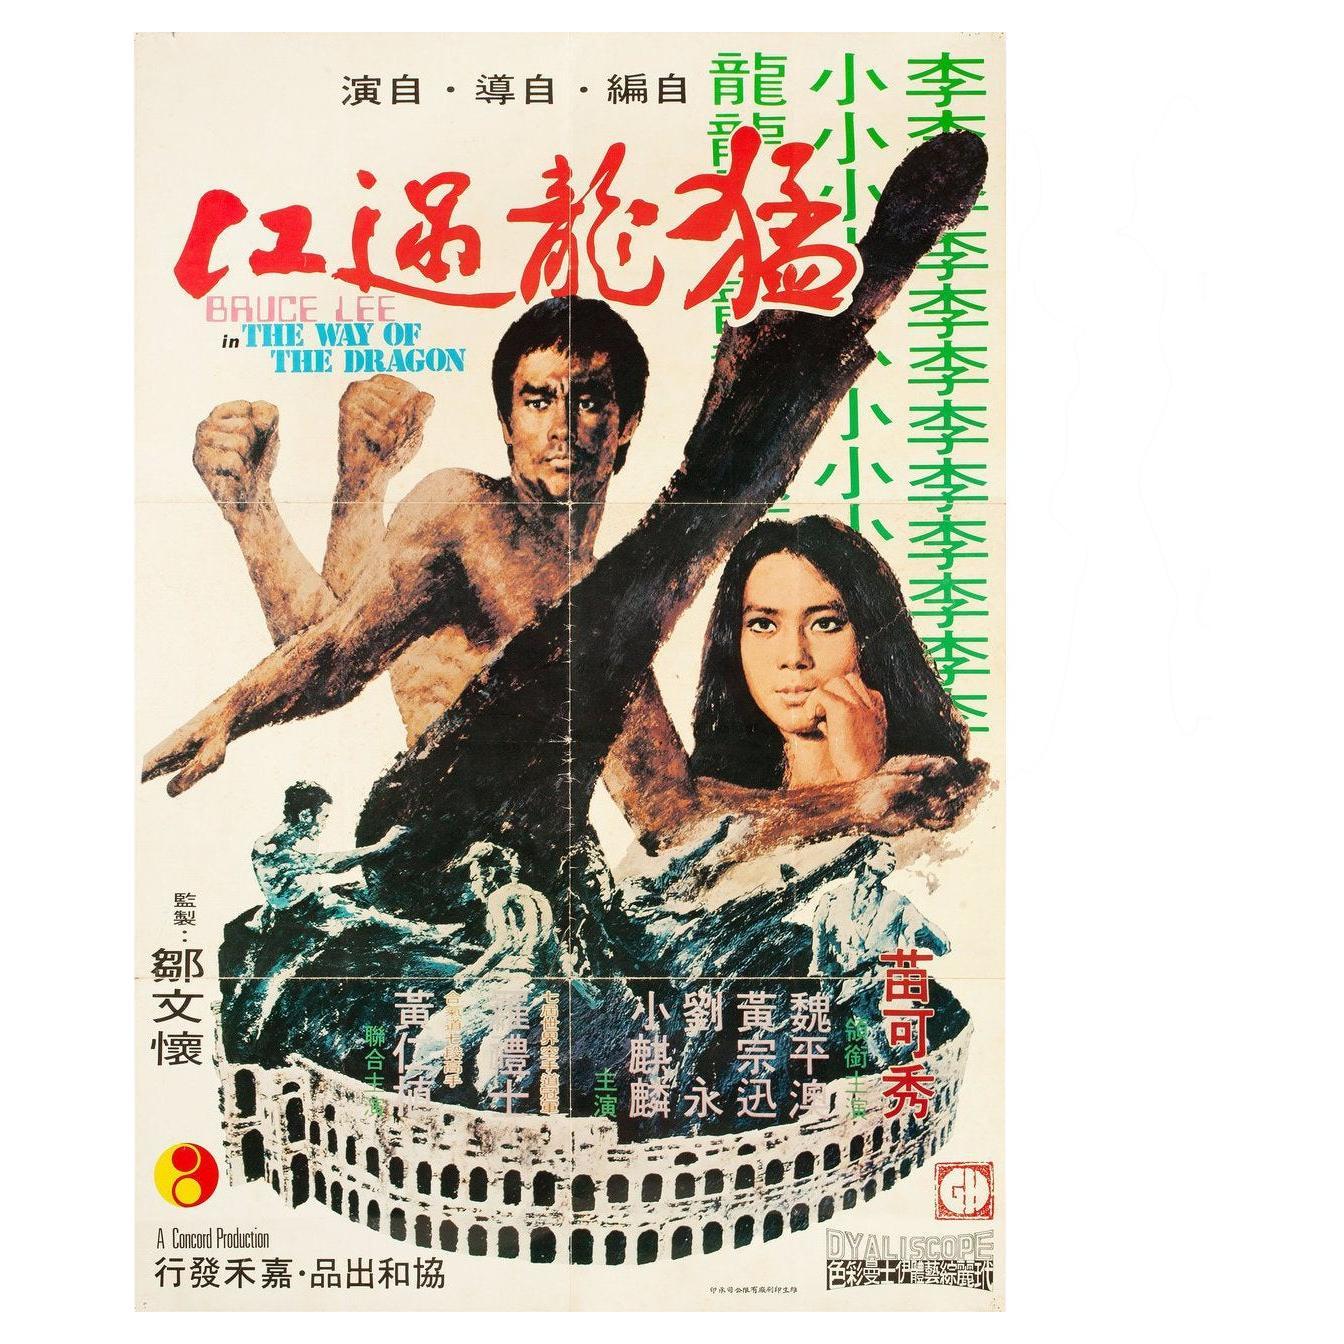 The Way of the Dragon 1975 Japanese Film Poster For Sale